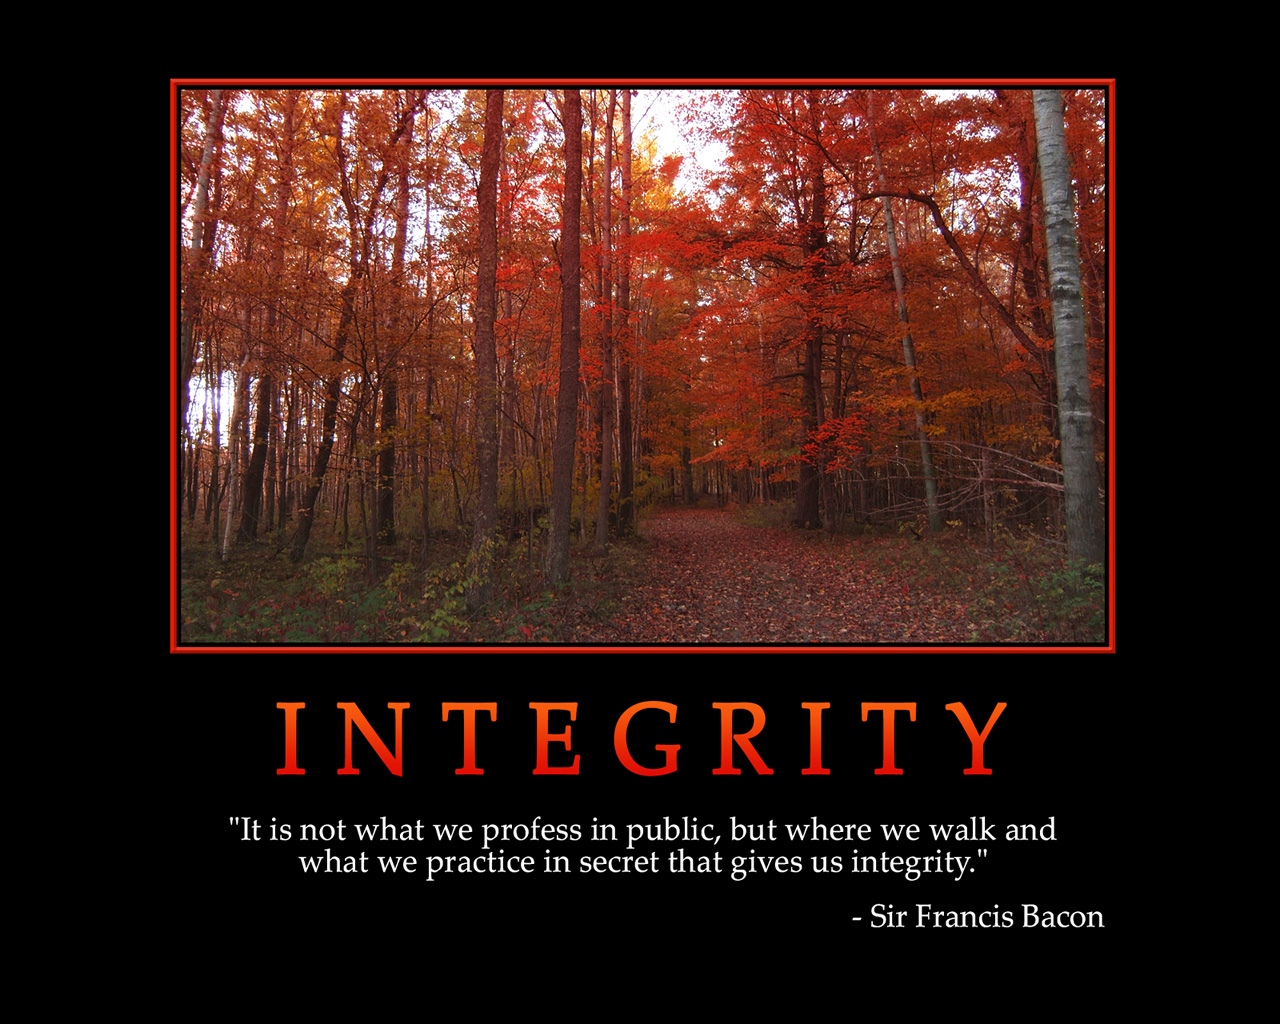 Funny Integrity Quotes. QuotesGram